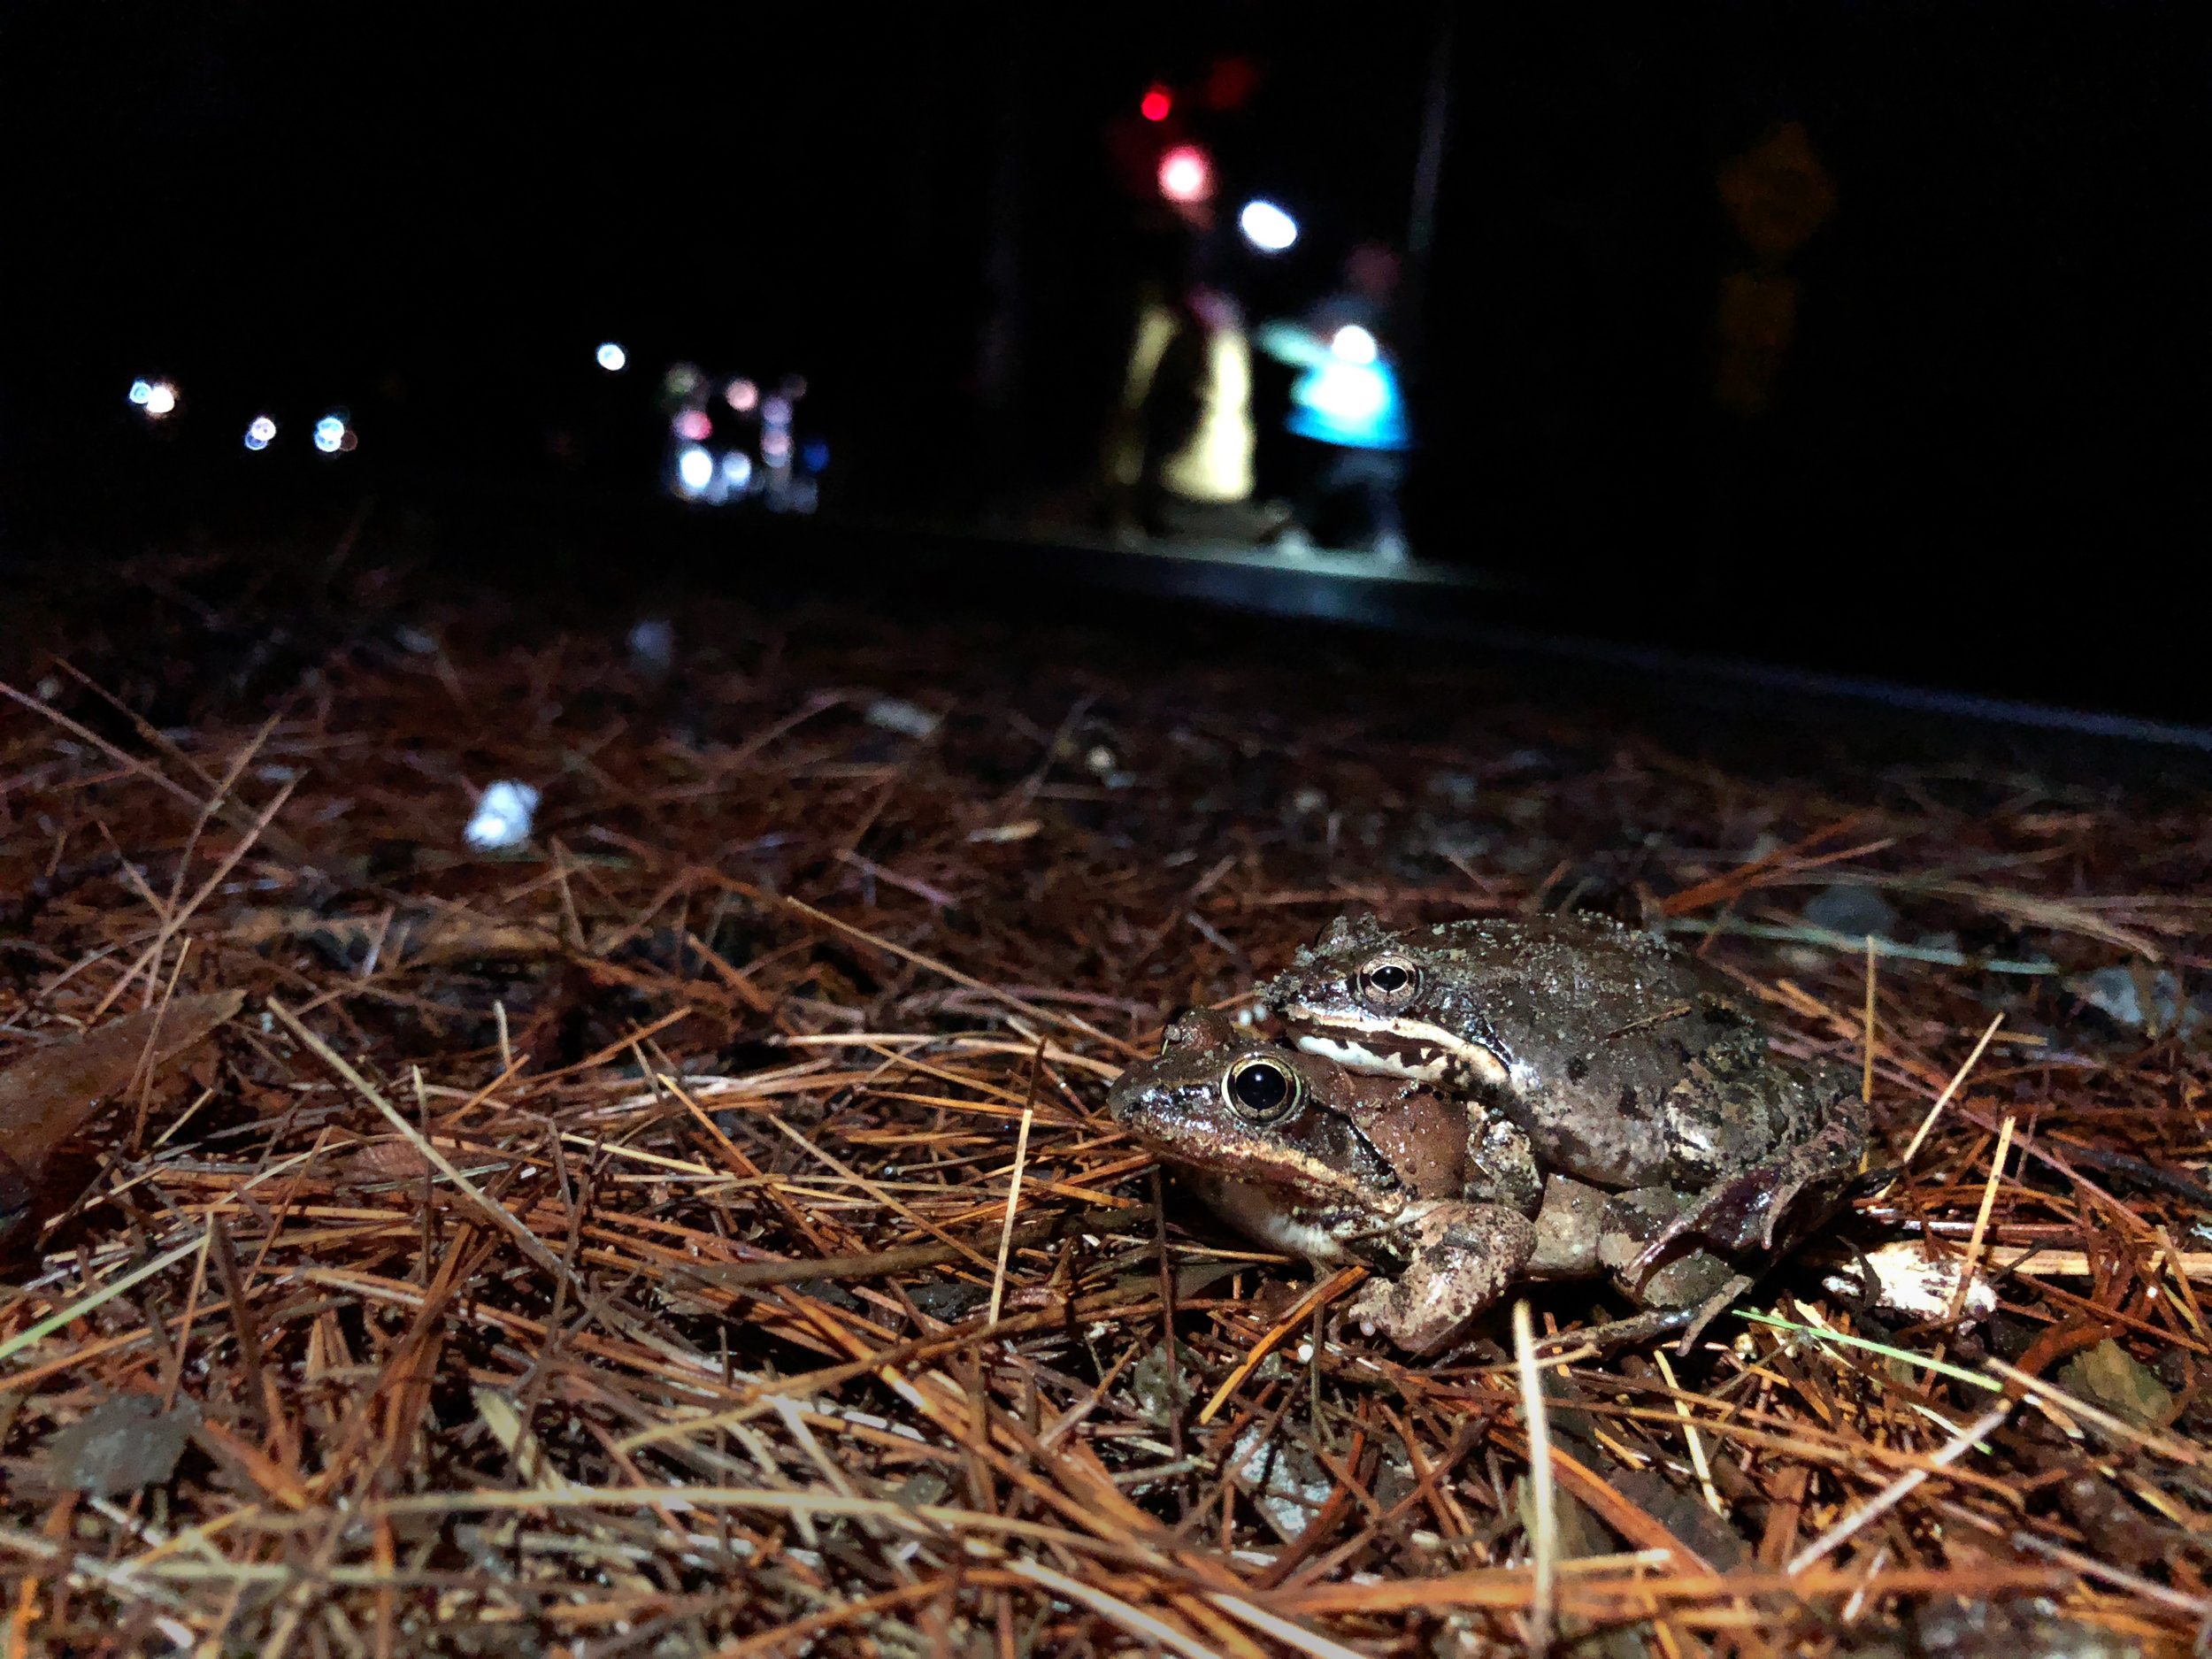  Spring is in the air! Two frogs mate on the side of the road during a rainy night during the amphibian migration season. (Anna Miller/Animalia Podcast) 